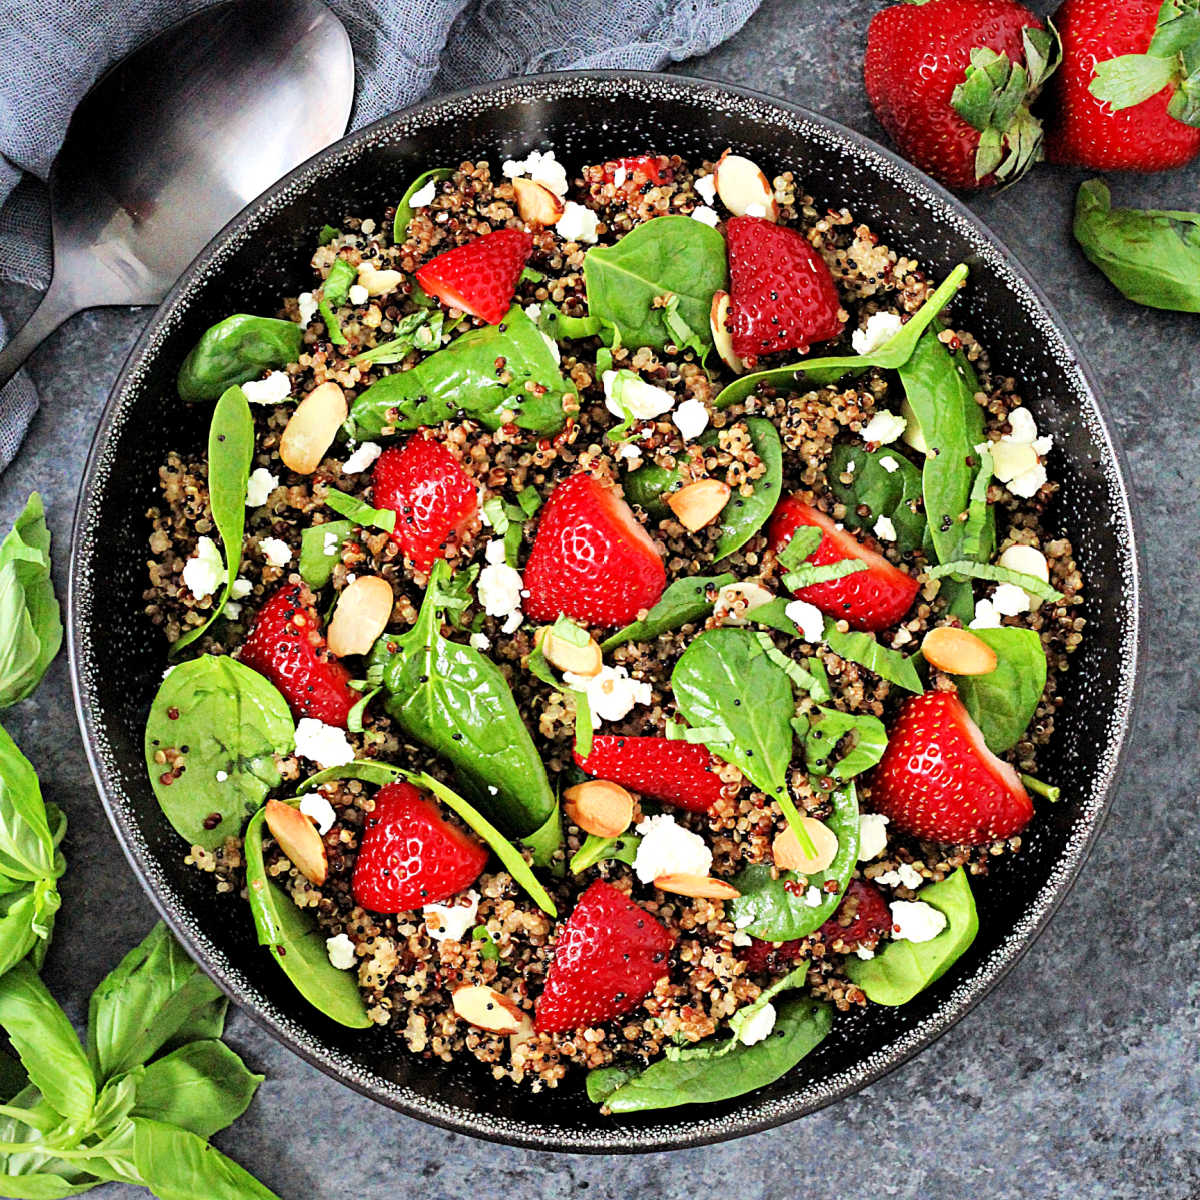 Quinoa salad with spinach and strawberries in a black bowl.